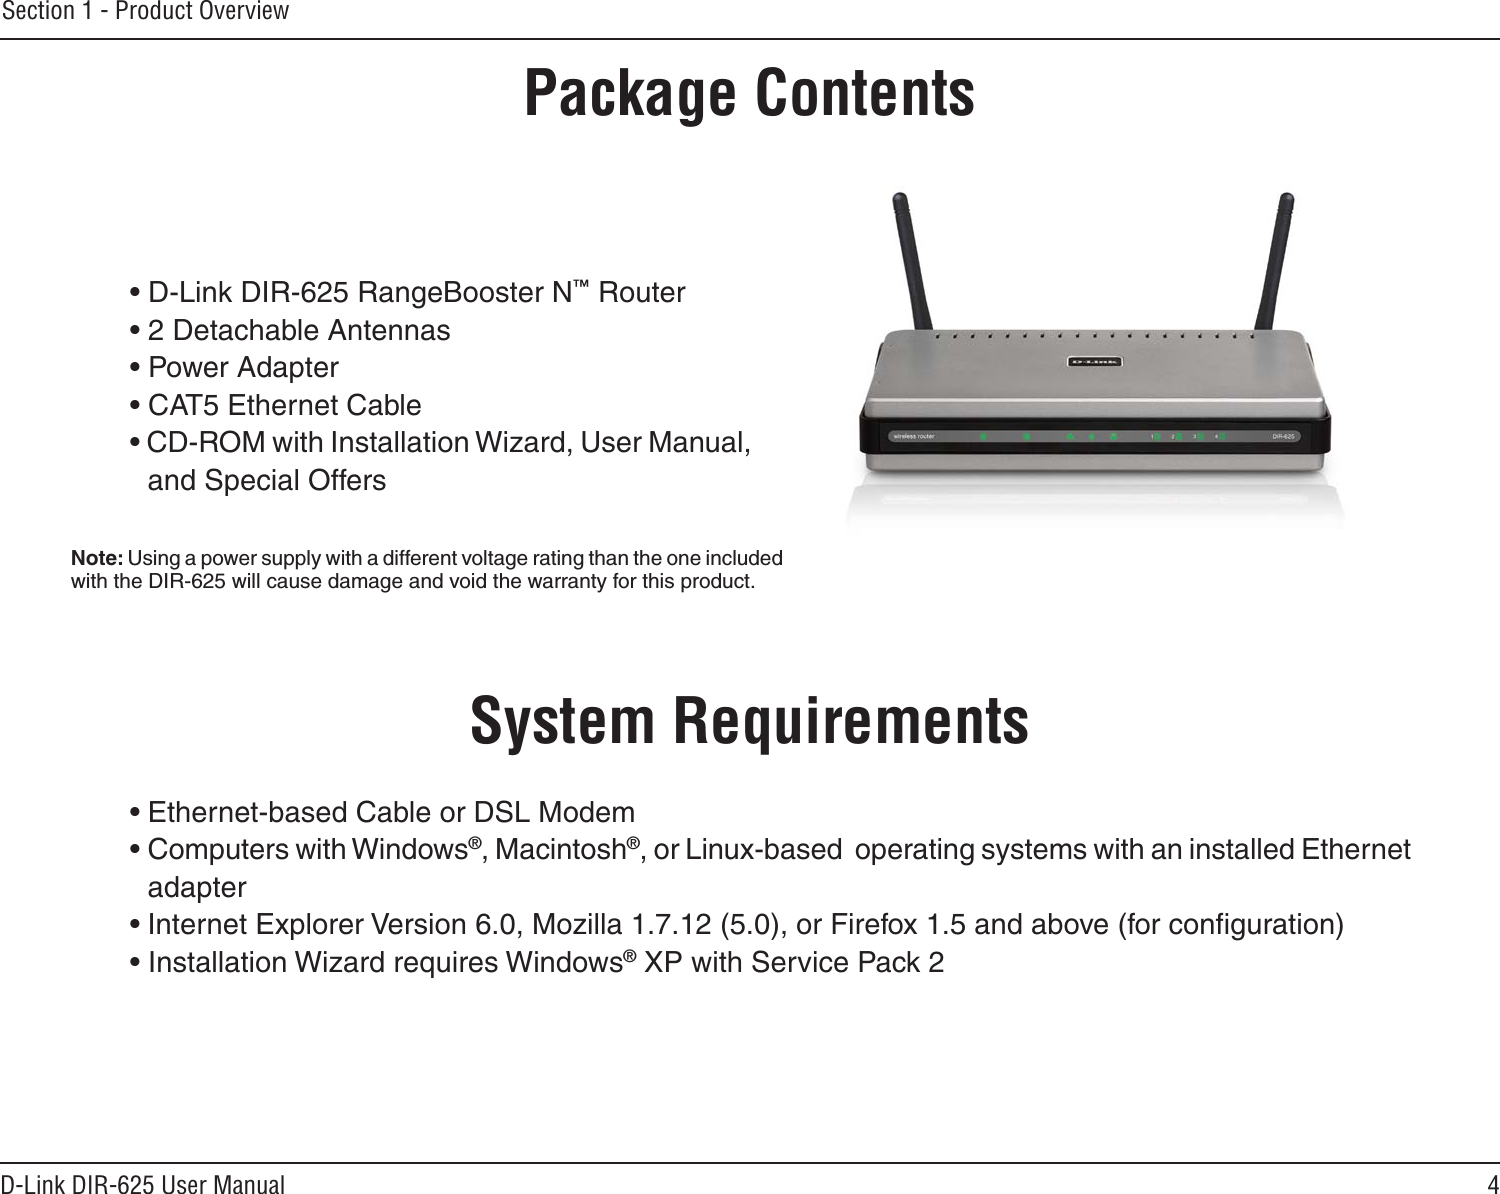 4D-Link DIR-625 User ManualSection 1 - Product Overview• D-Link DIR-625 RangeBooster N™ Router• 2 Detachable Antennas• Power Adapter• CAT5 Ethernet Cable• CD-ROM with Installation Wizard, User Manual, and Special OffersSystem Requirements• Ethernet-based Cable or DSL Modem• Computers with Windows®, Macintosh®, or Linux-based  operating systems with an installed Ethernet adapter• Internet Explorer Version 6.0, Mozilla 1.7.12 (5.0), or Firefox 1.5 and above (for conﬁguration)• Installation Wizard requires Windows® XP with Service Pack 2Product OverviewPackage ContentsNote: Using a power supply with a different voltage rating than the one included with the DIR-625 will cause damage and void the warranty for this product.